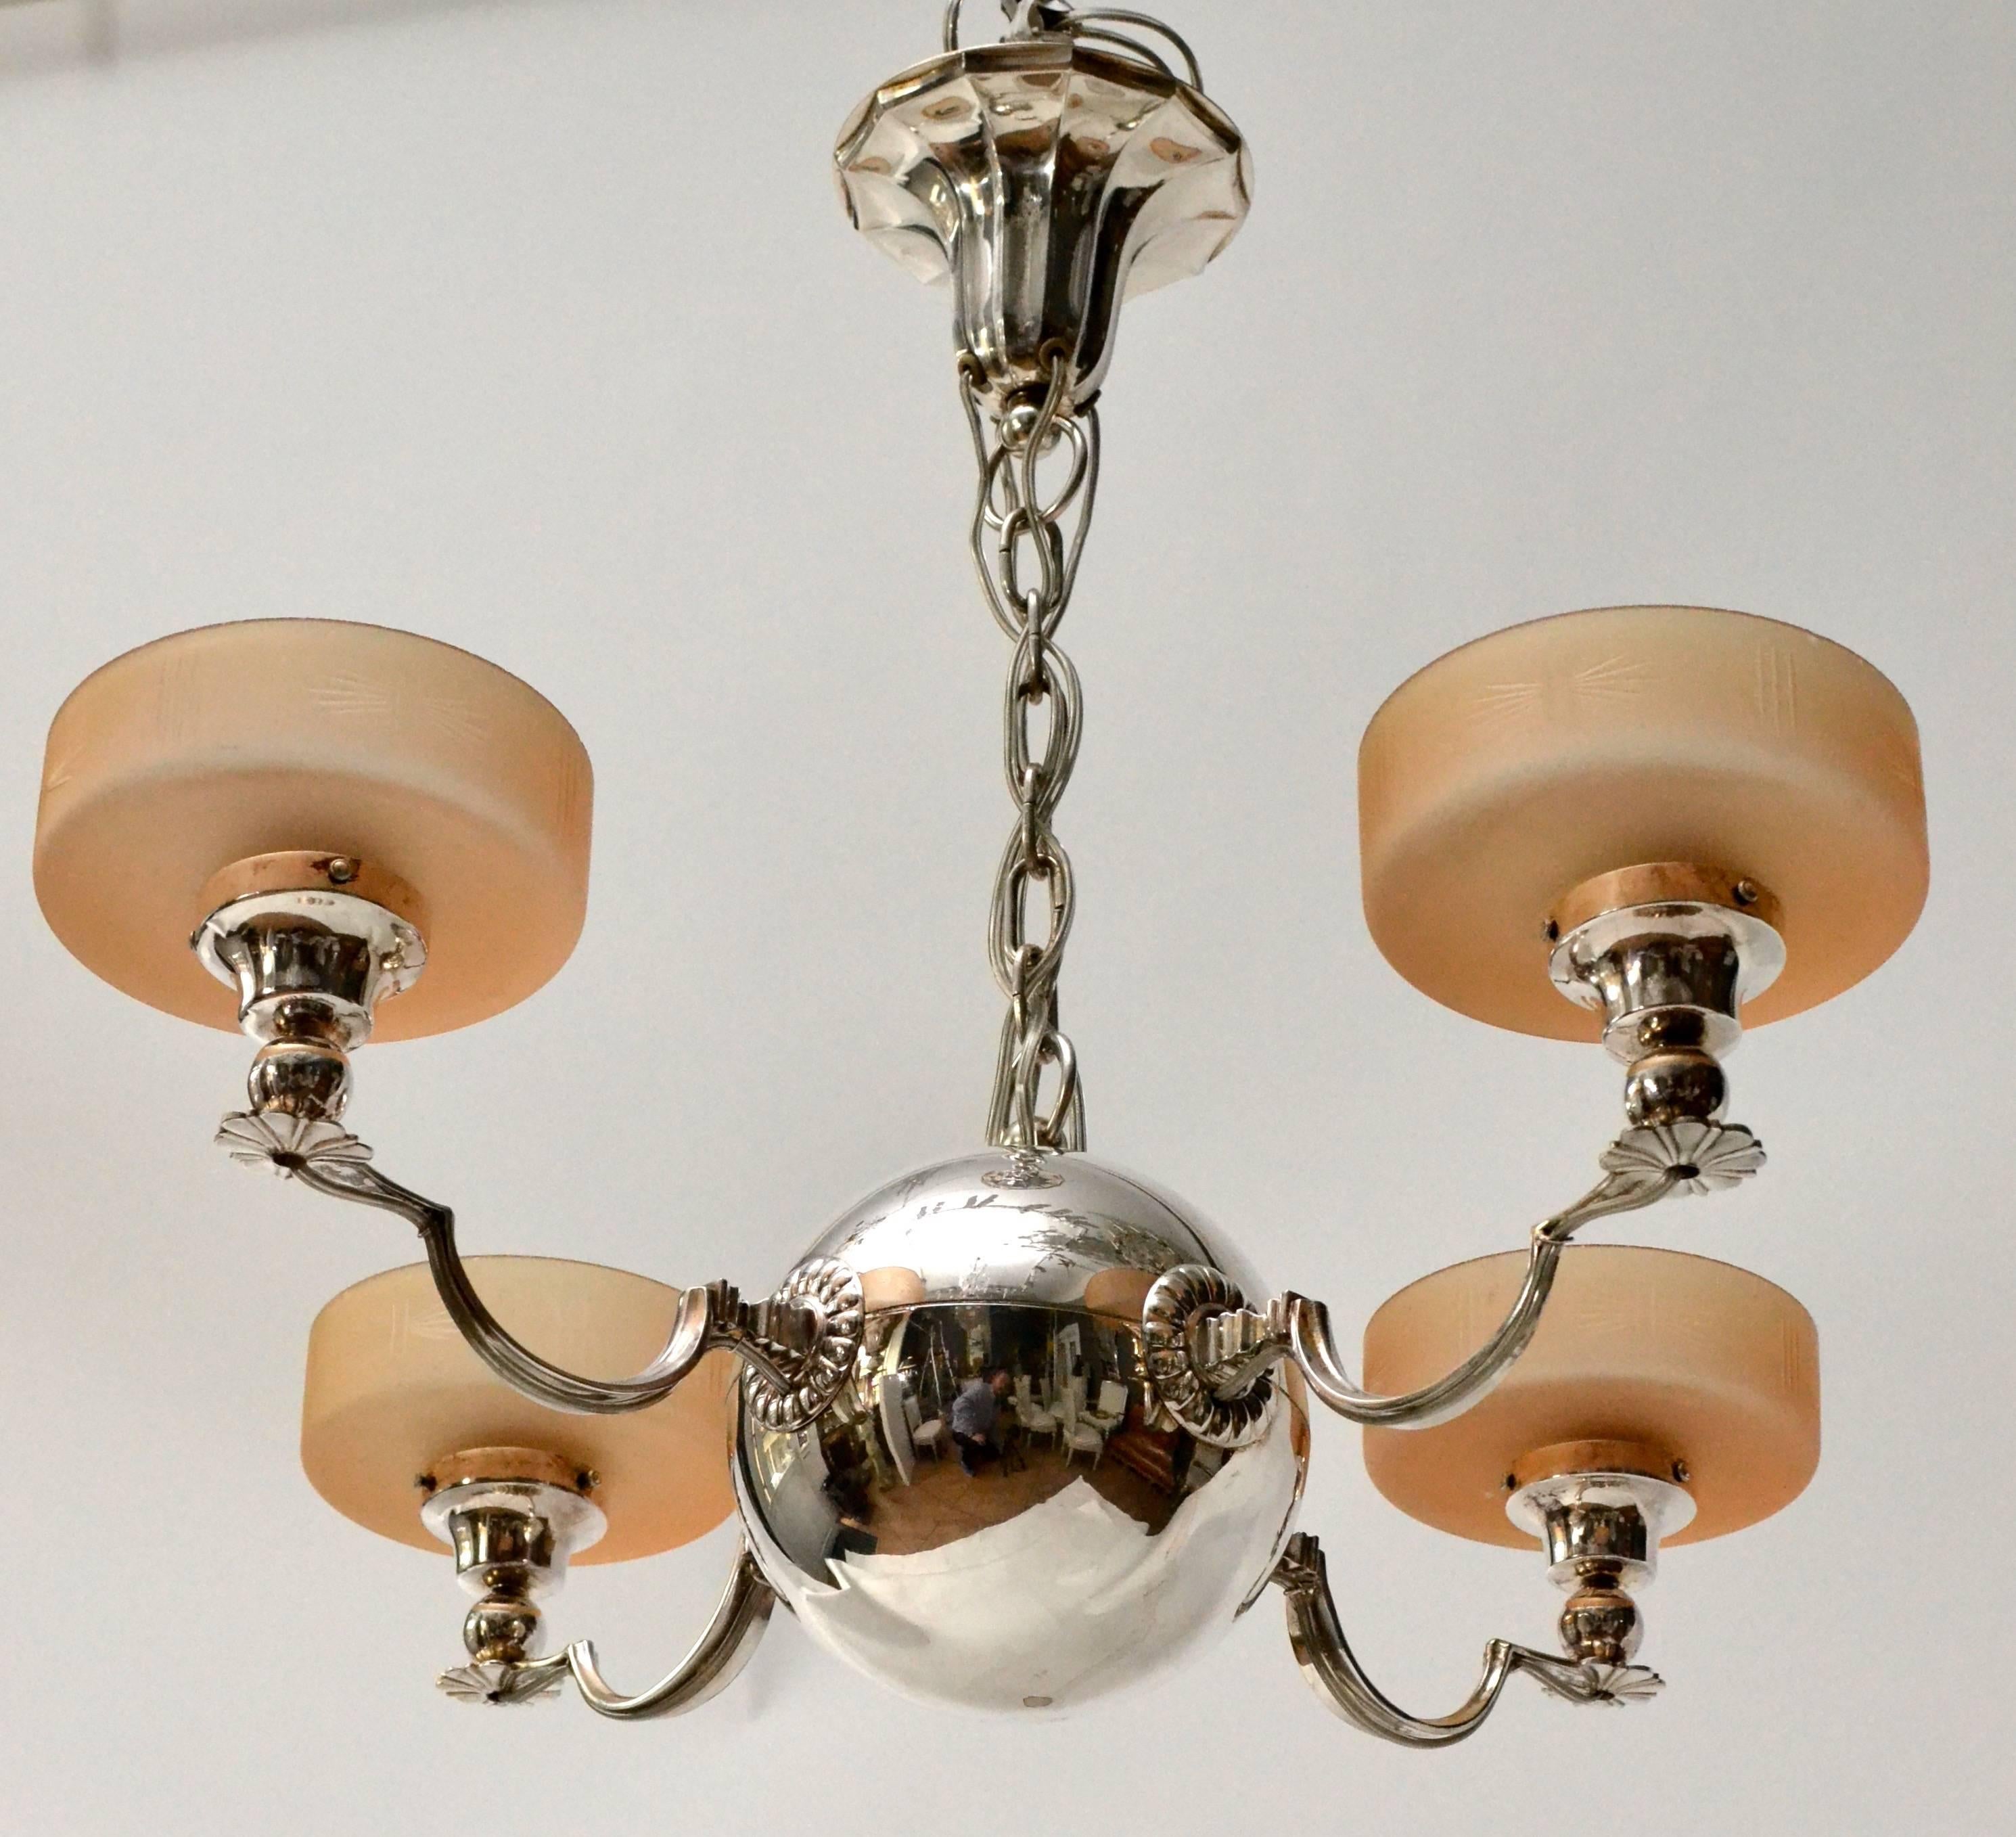 An Art Deco silver plated ceiling lamp after a design by Elis Bergh and made by CG Hallberg, circa 1925. Lampshades of glass.
 